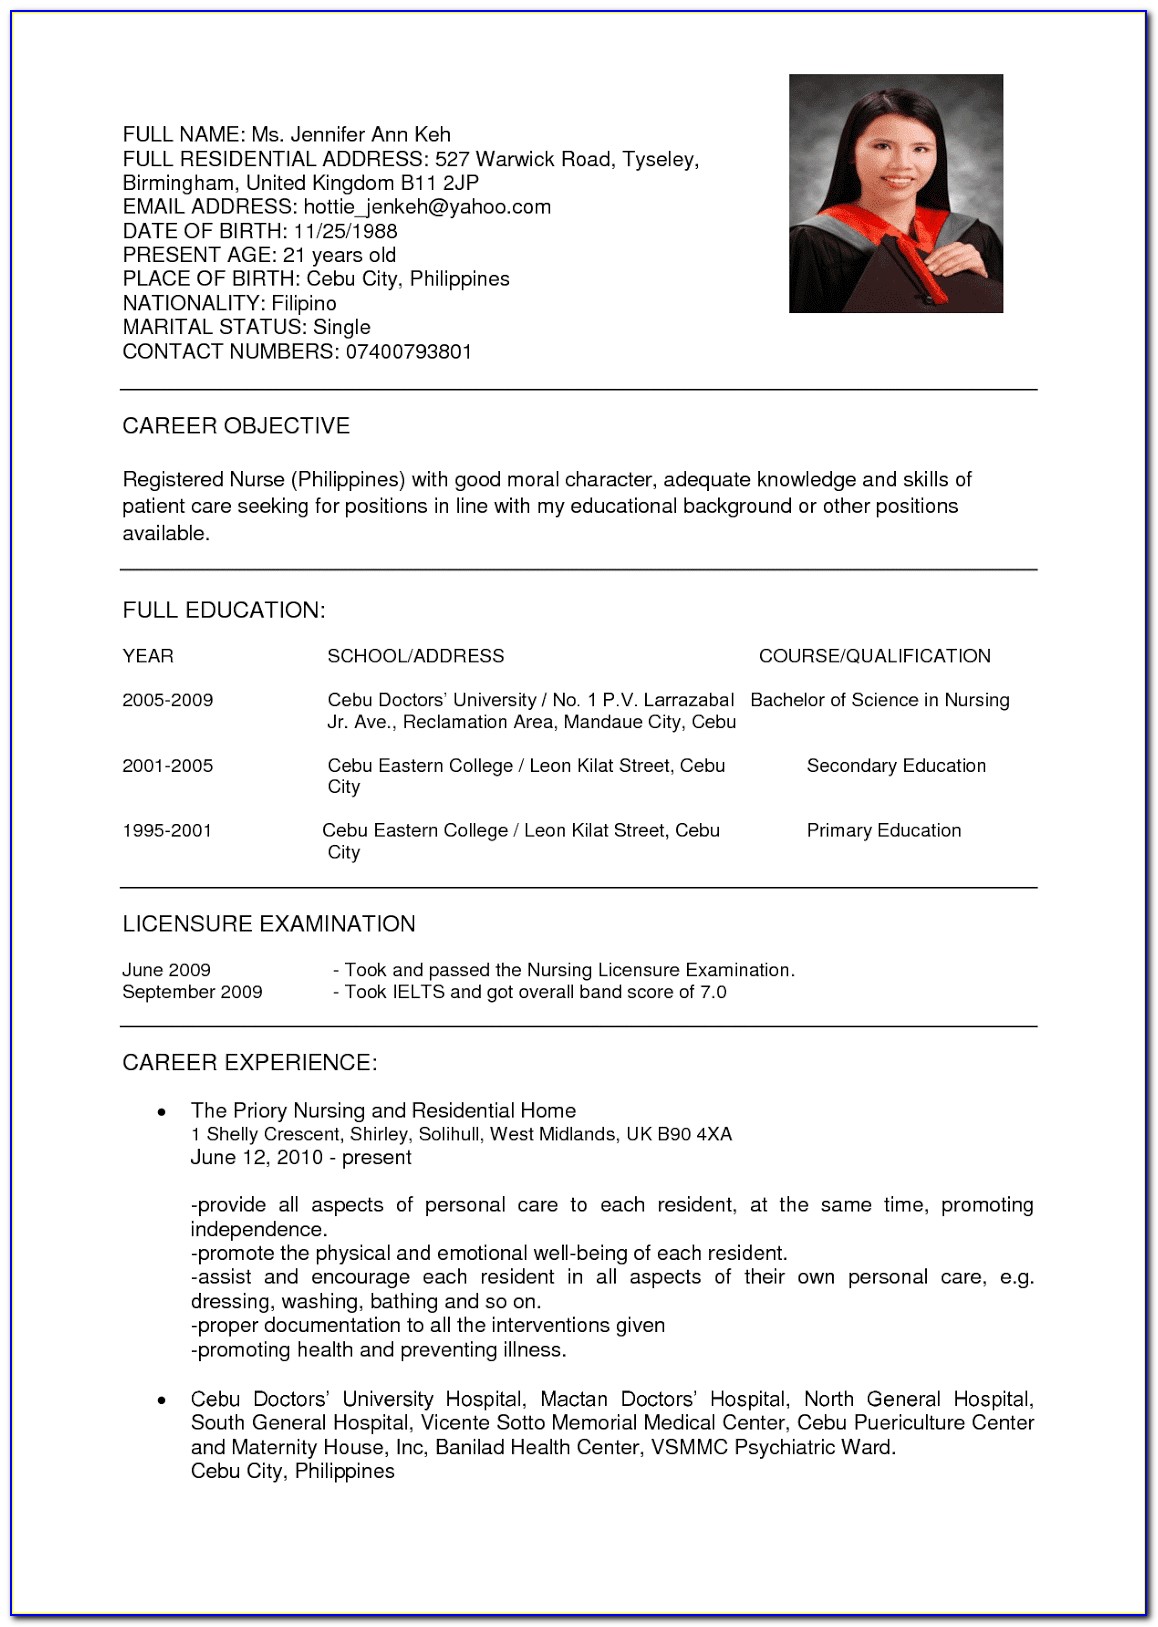 Resume Objective Examples For Registered Nurses